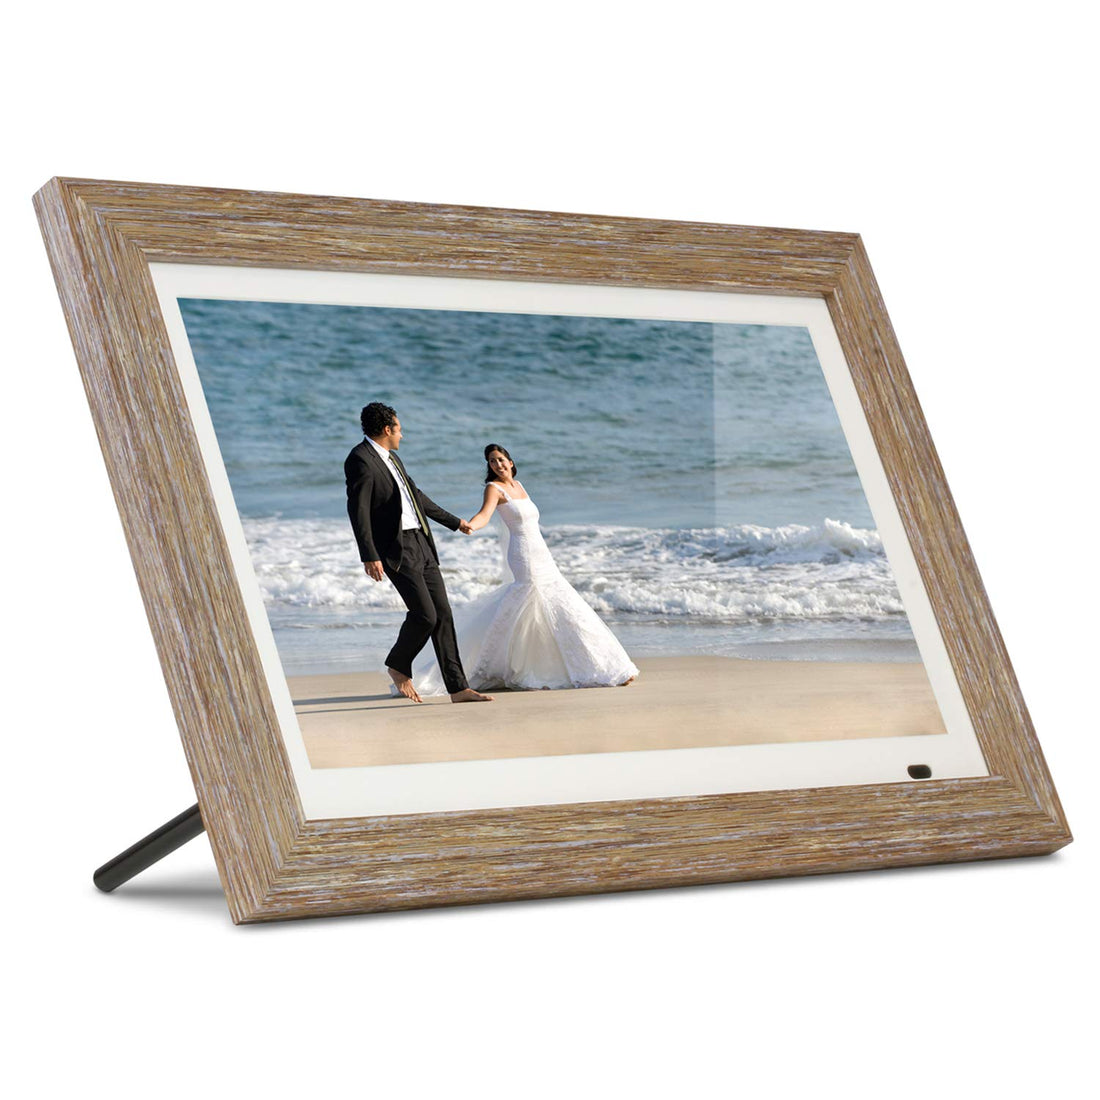 Aluratek 13.3" Digital Photo Frame with Interchangeable Frames (Distressed Wood)